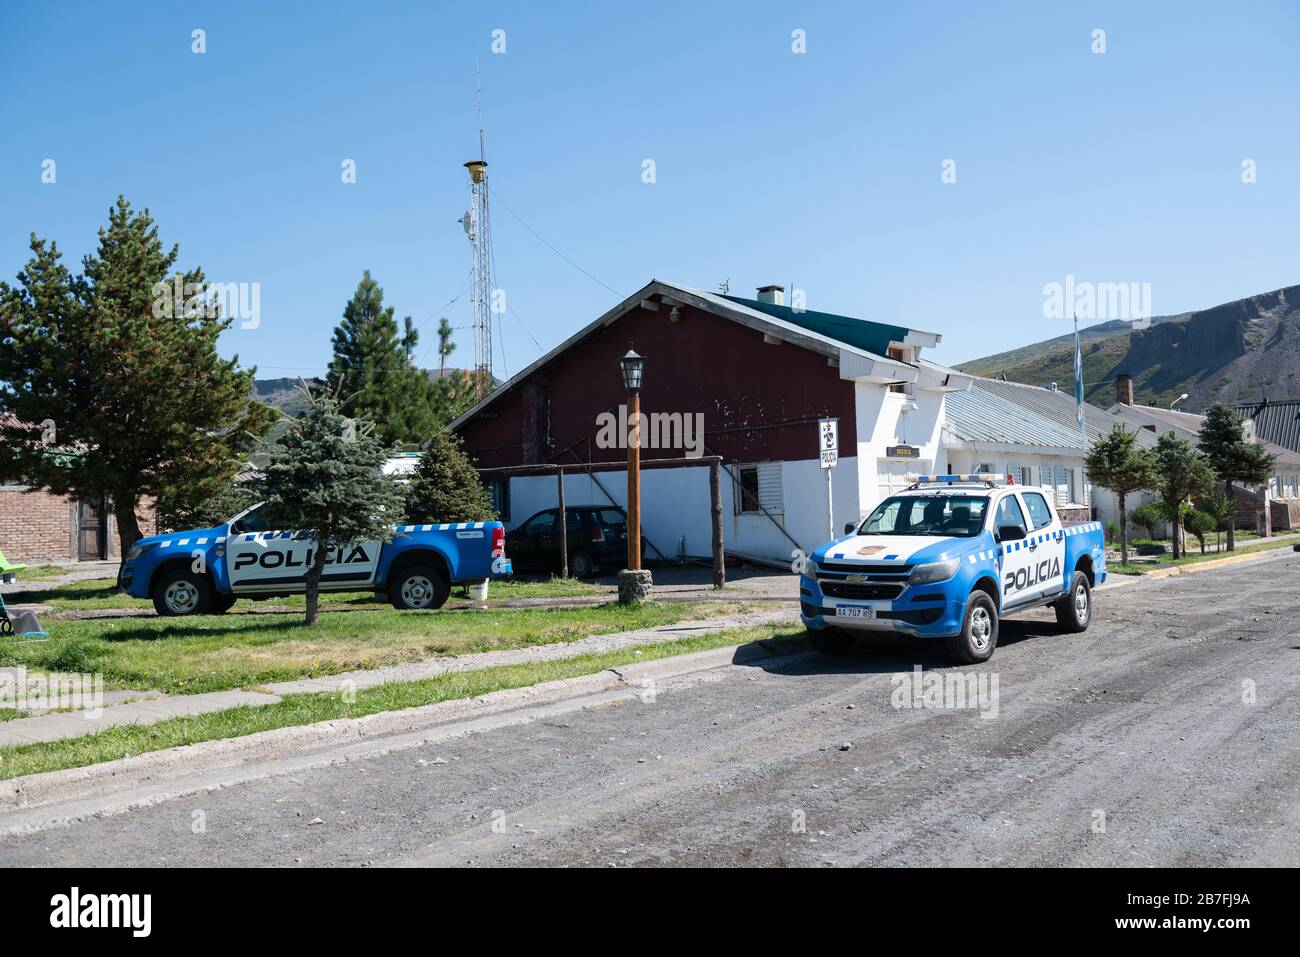 Caviahue, Argentina - March 03 2020: Facade and trucks of police department in Caviahue, Neuquén province. Stock Photo